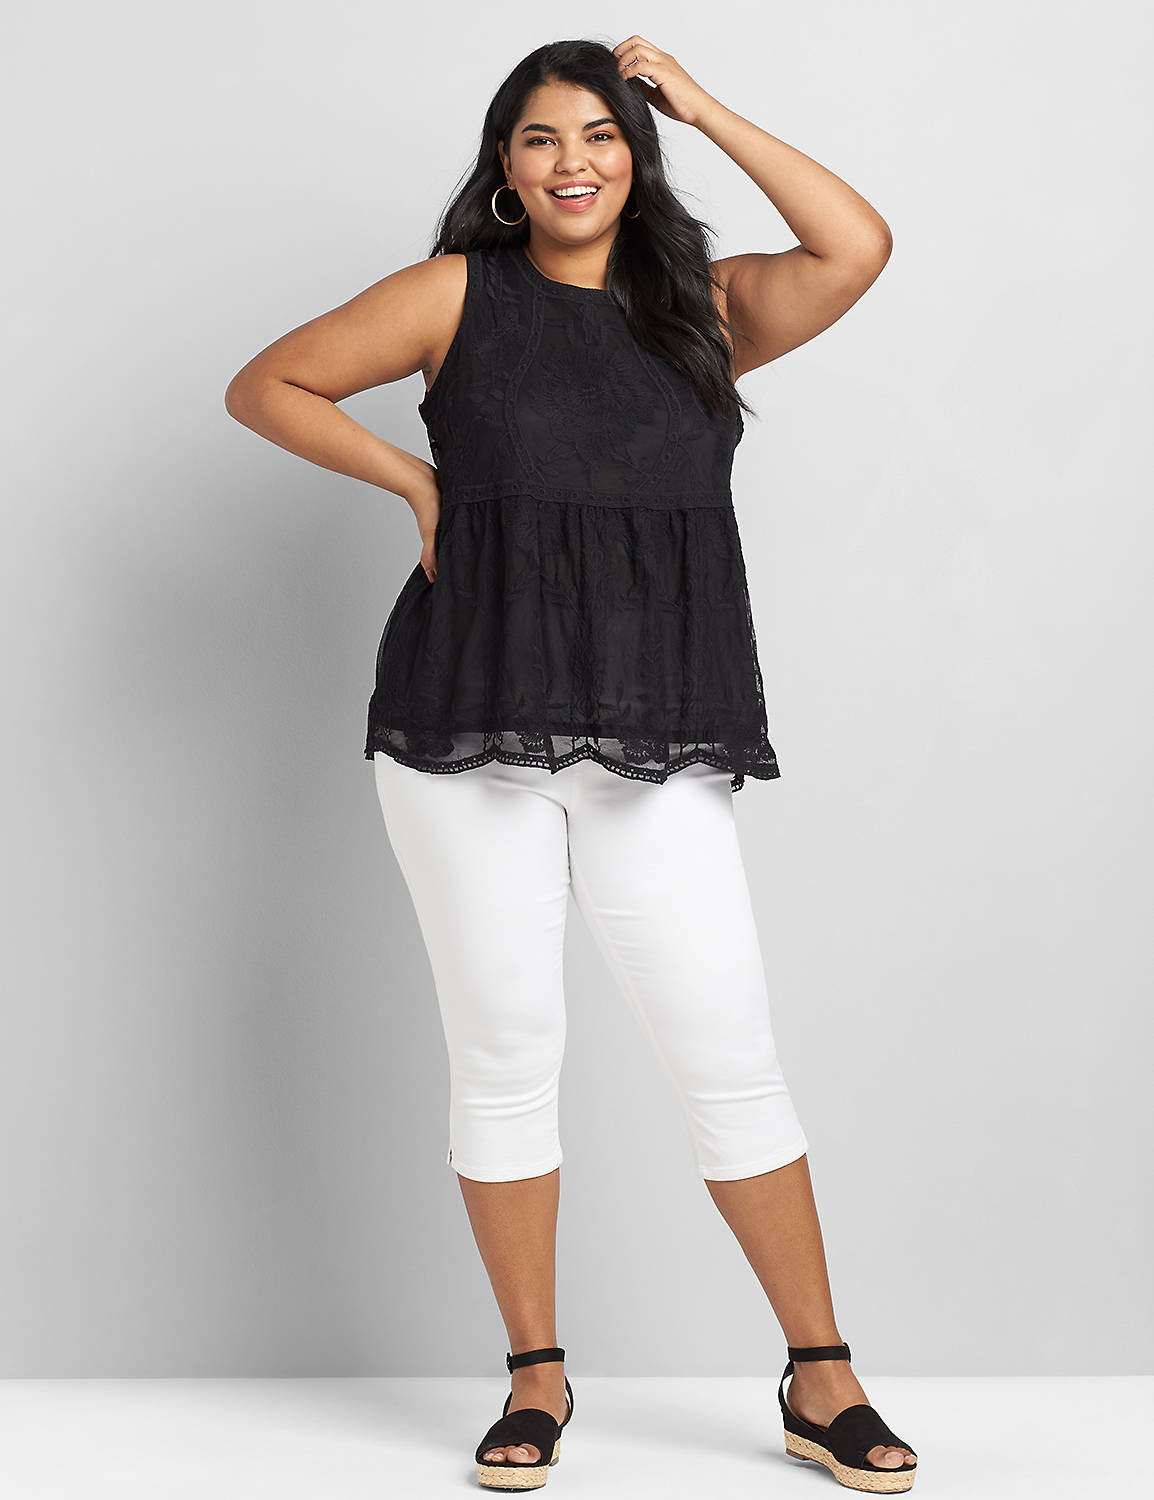 Sleeveless Crew Neck Baby Doll Embroidered Mesh 1118904:Ascena Black:22 Product Image 3